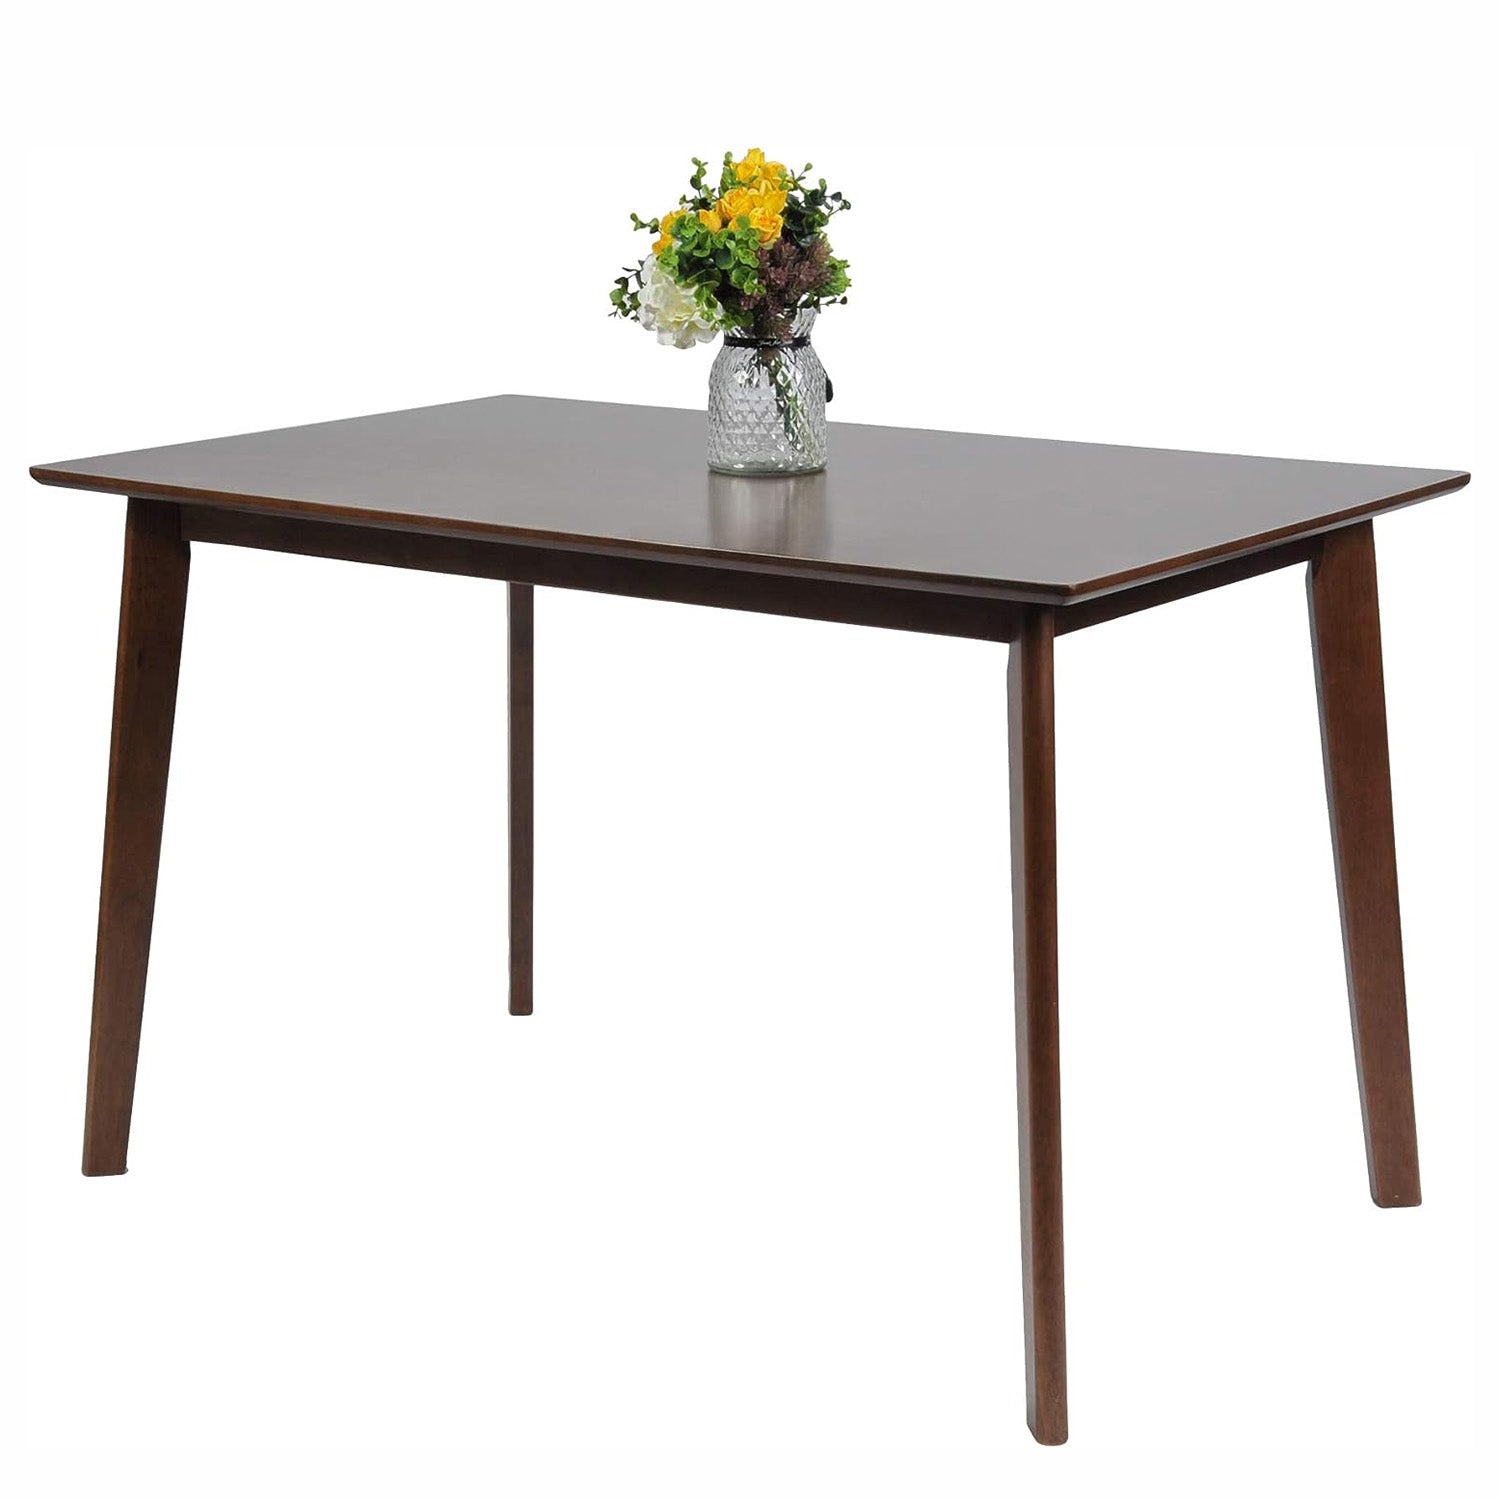 47.2" Rectangle Dining Table for 4-6 Mid-Century Kitchen Table with Solid Wood Leg